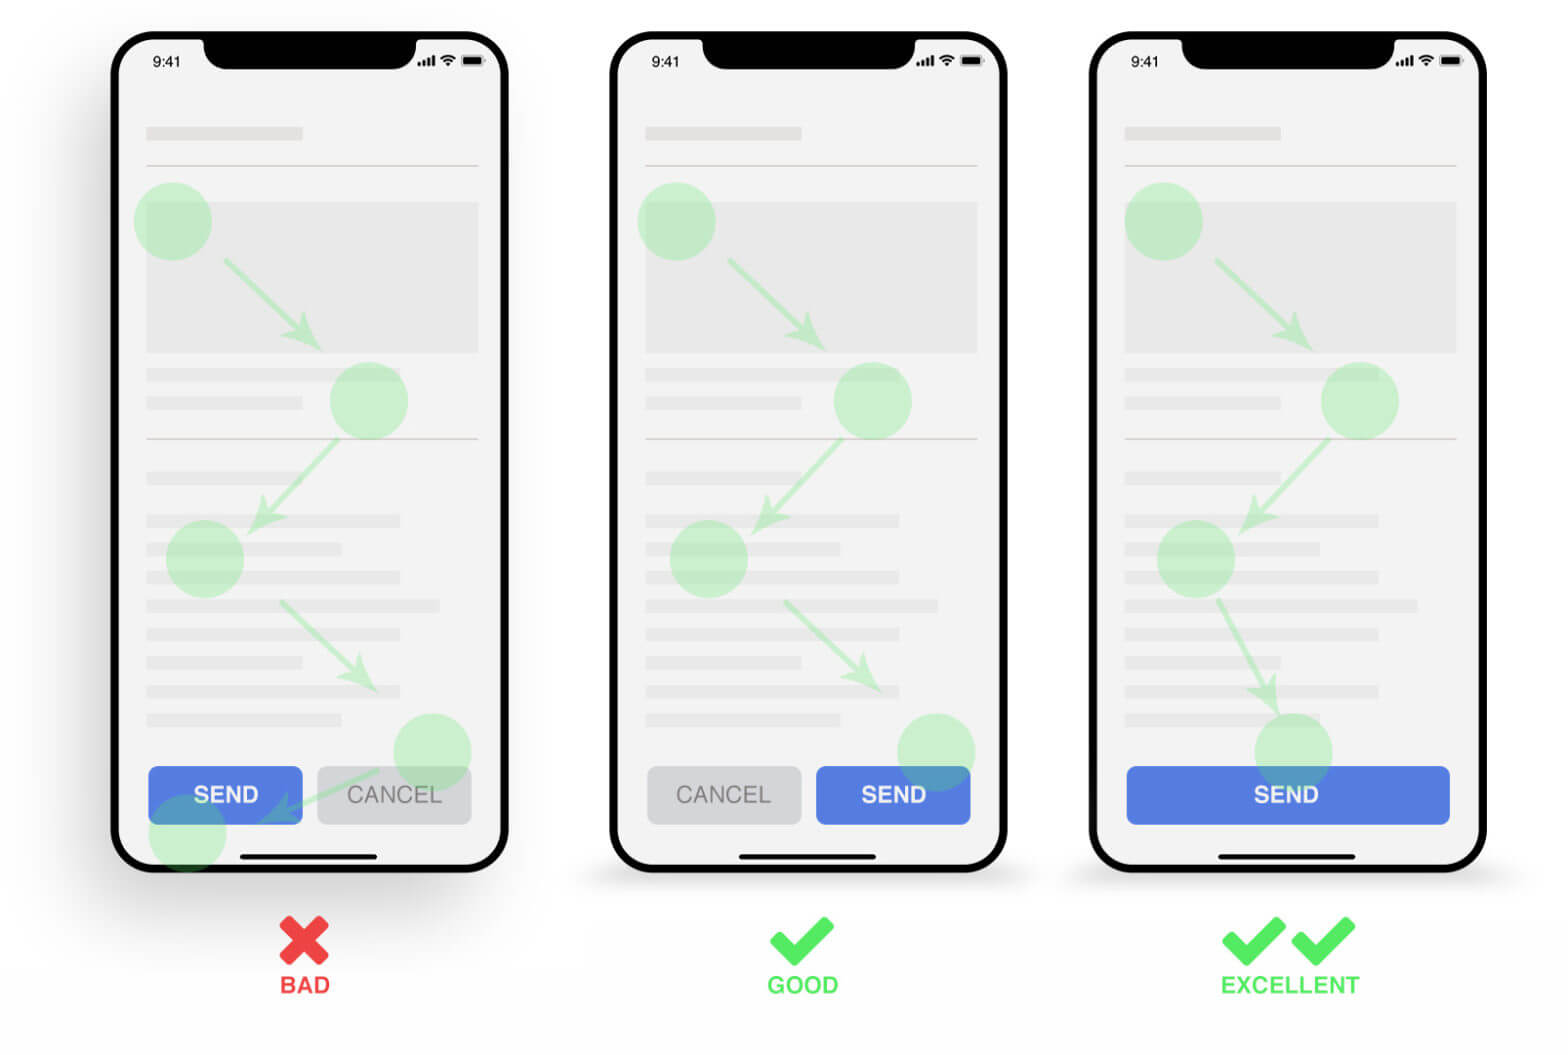 UI & UX Mistakes That Are Killing Your Mobile App & Website Design 2020